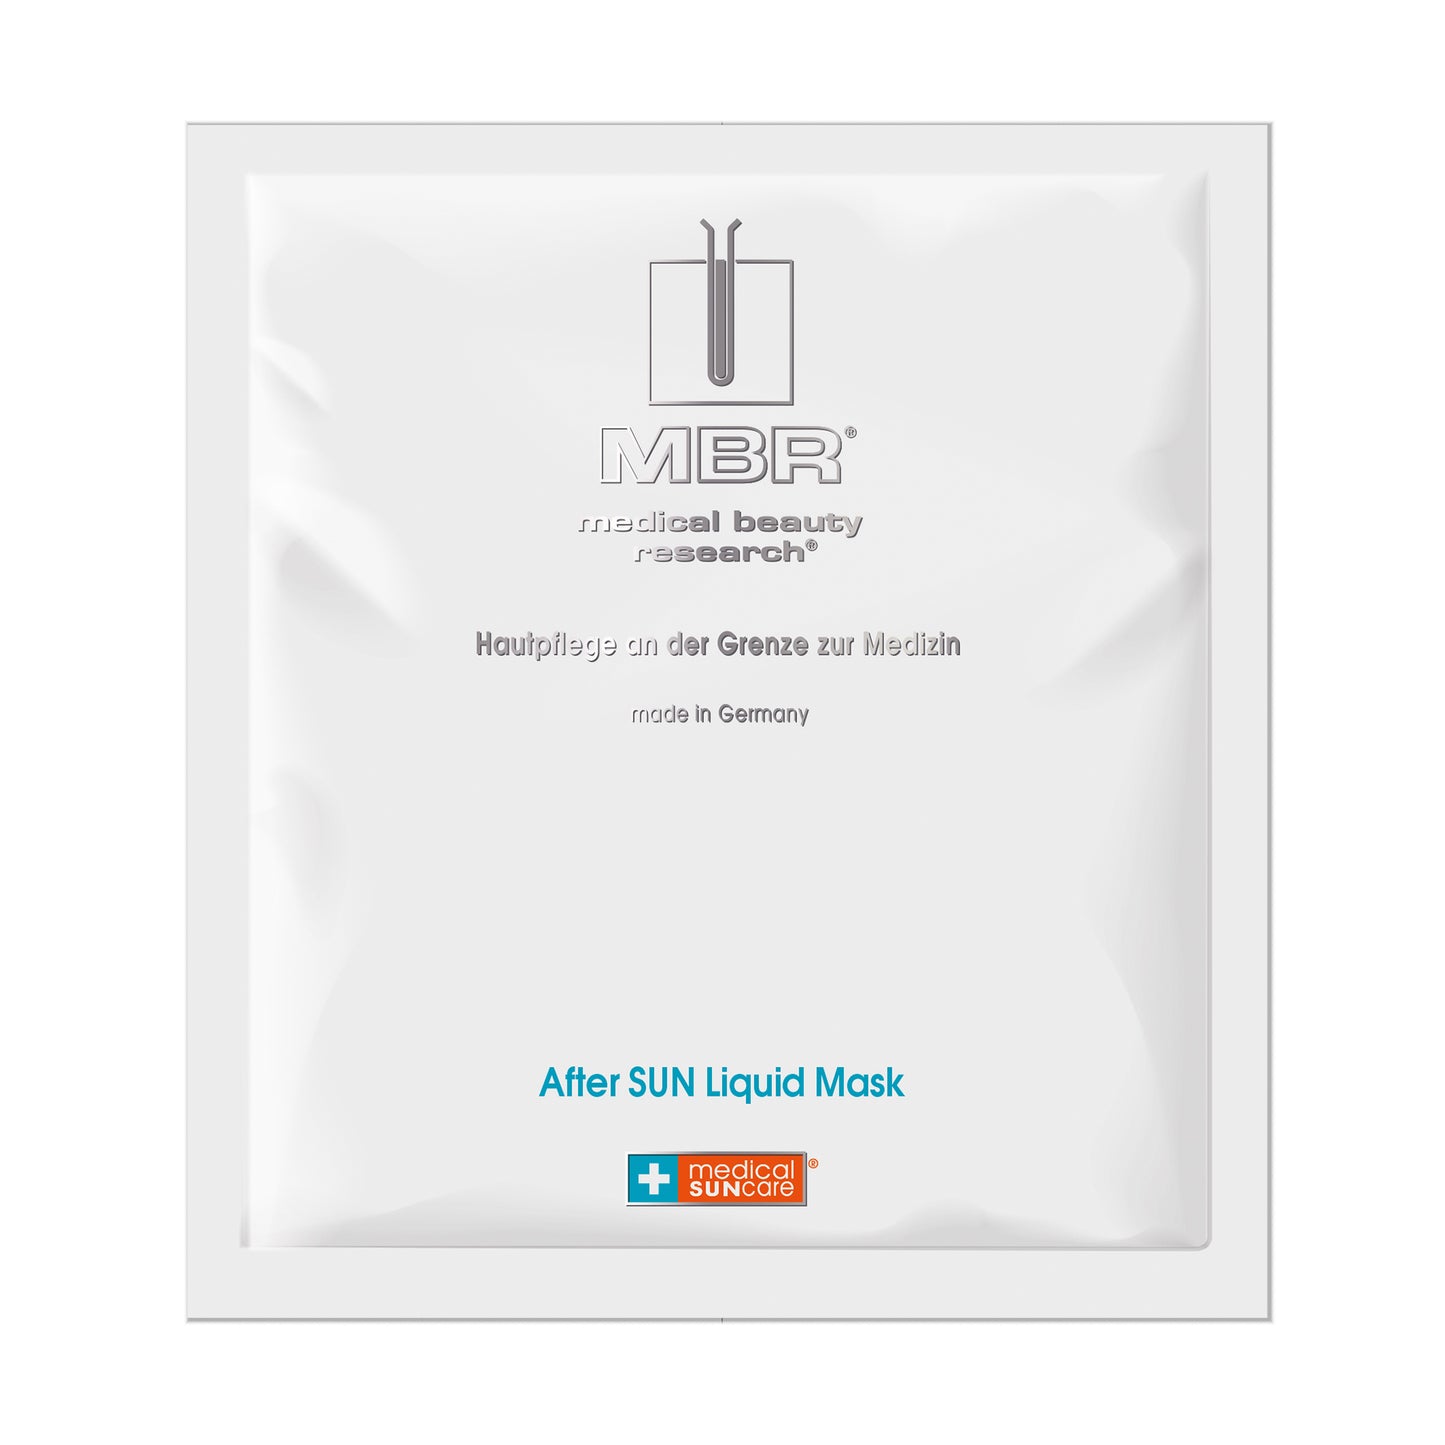 After SUN Liquid Sheet Mask: Cooling, Restoring and Soothing After Sun Mask